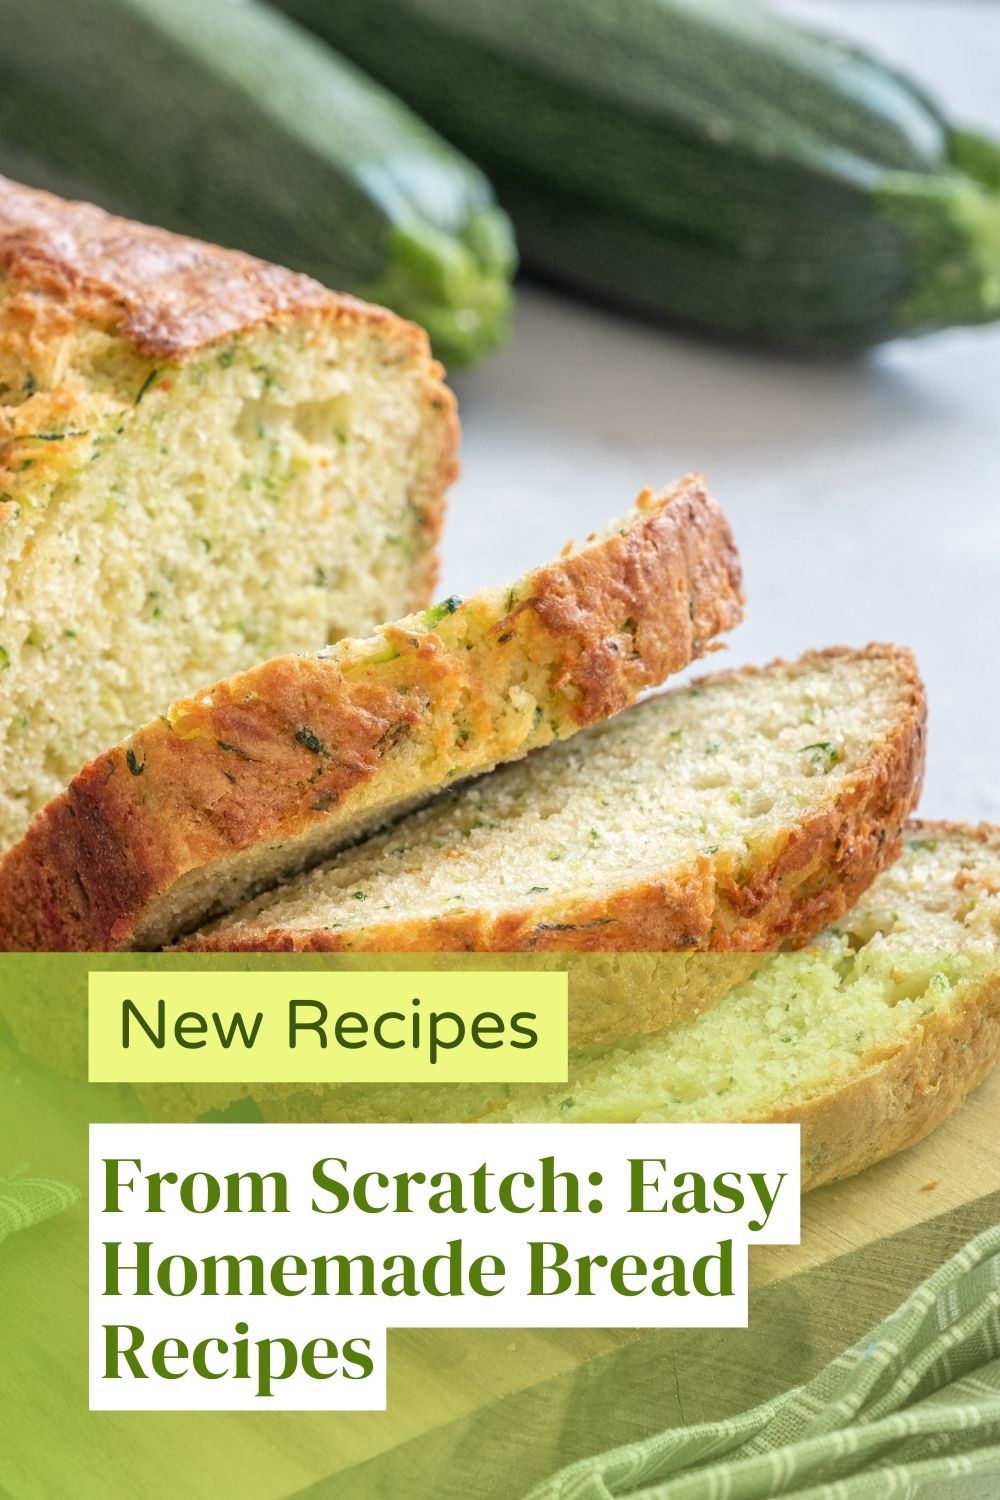 From Scratch: Easy Homemade Bread Recipes